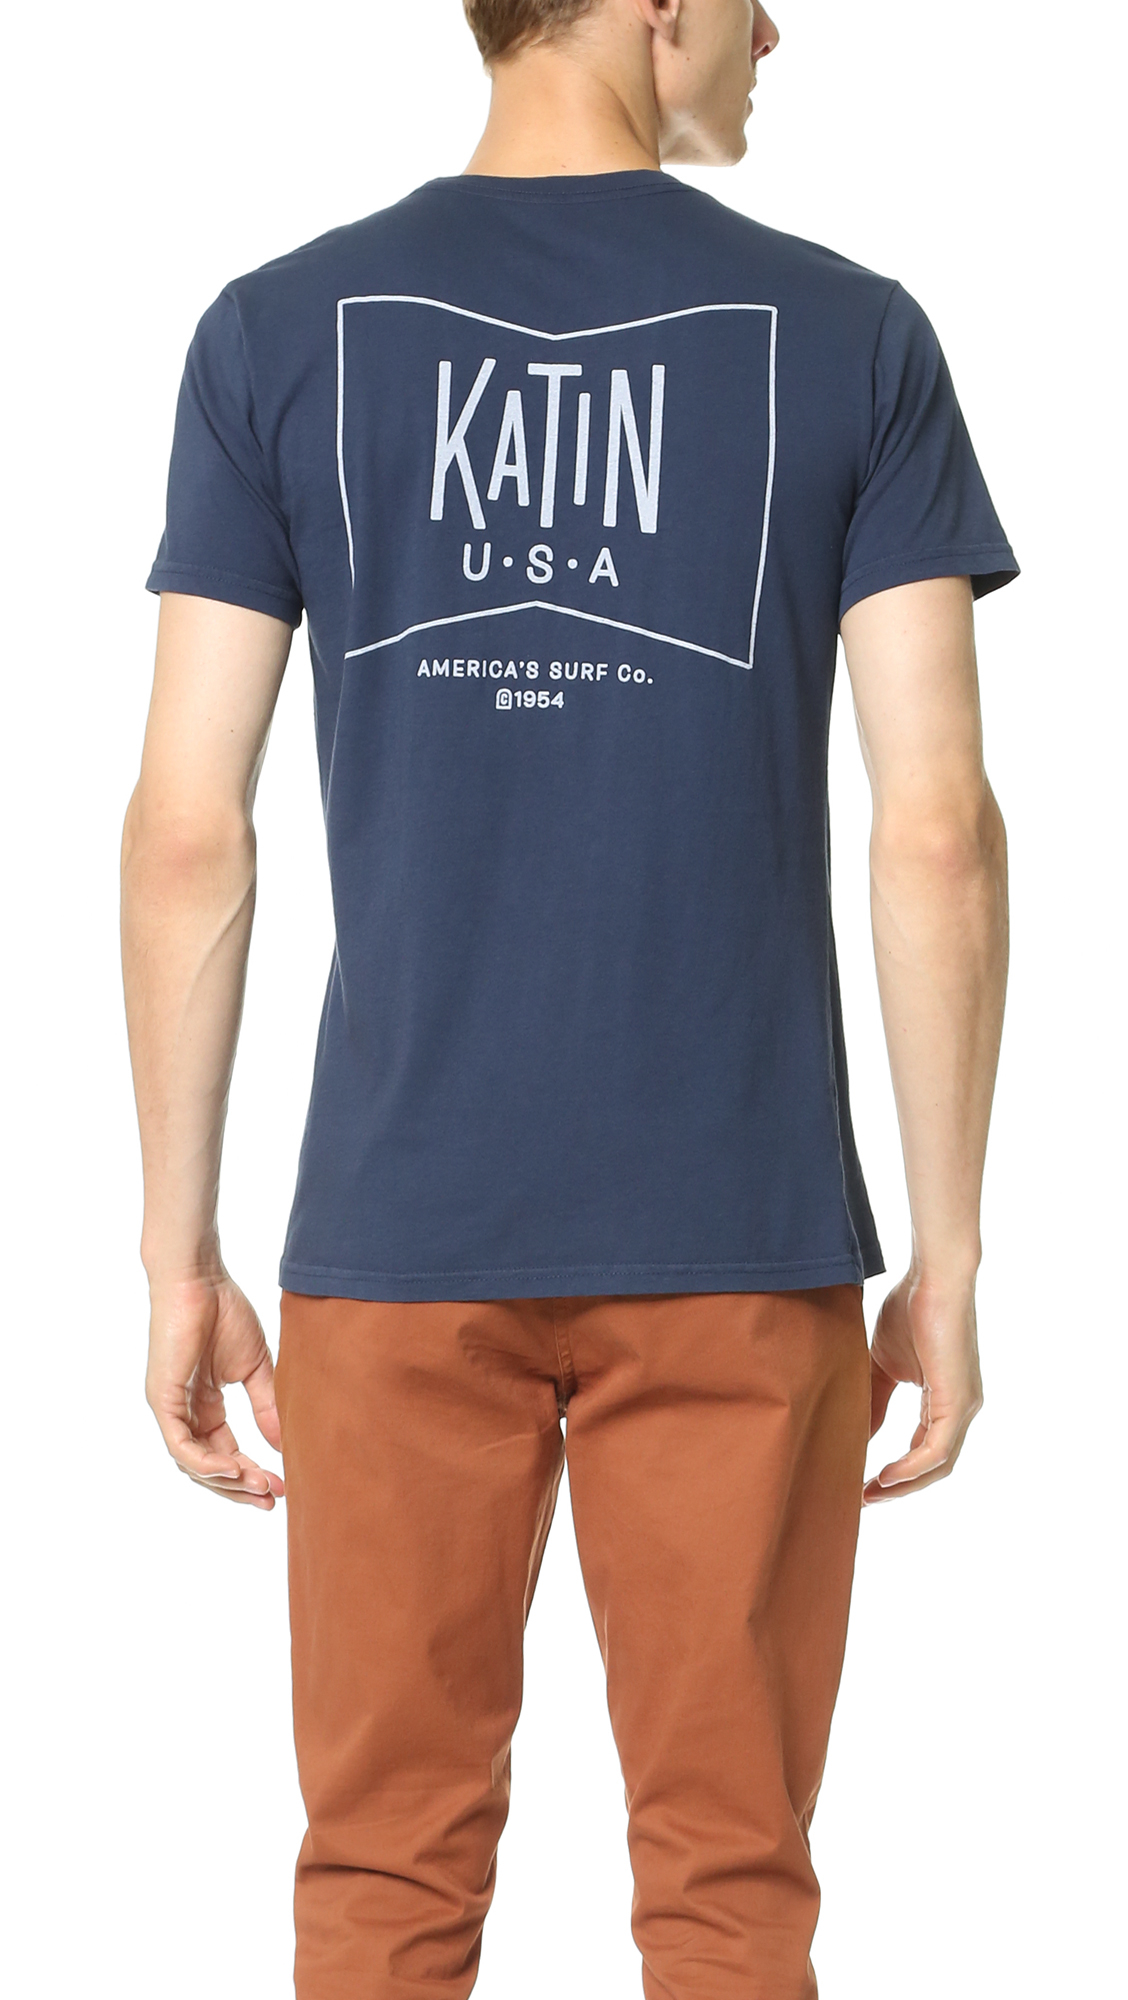 Katin Cotton Grubby Tee in Midnight Navy (Blue) for Men - Lyst